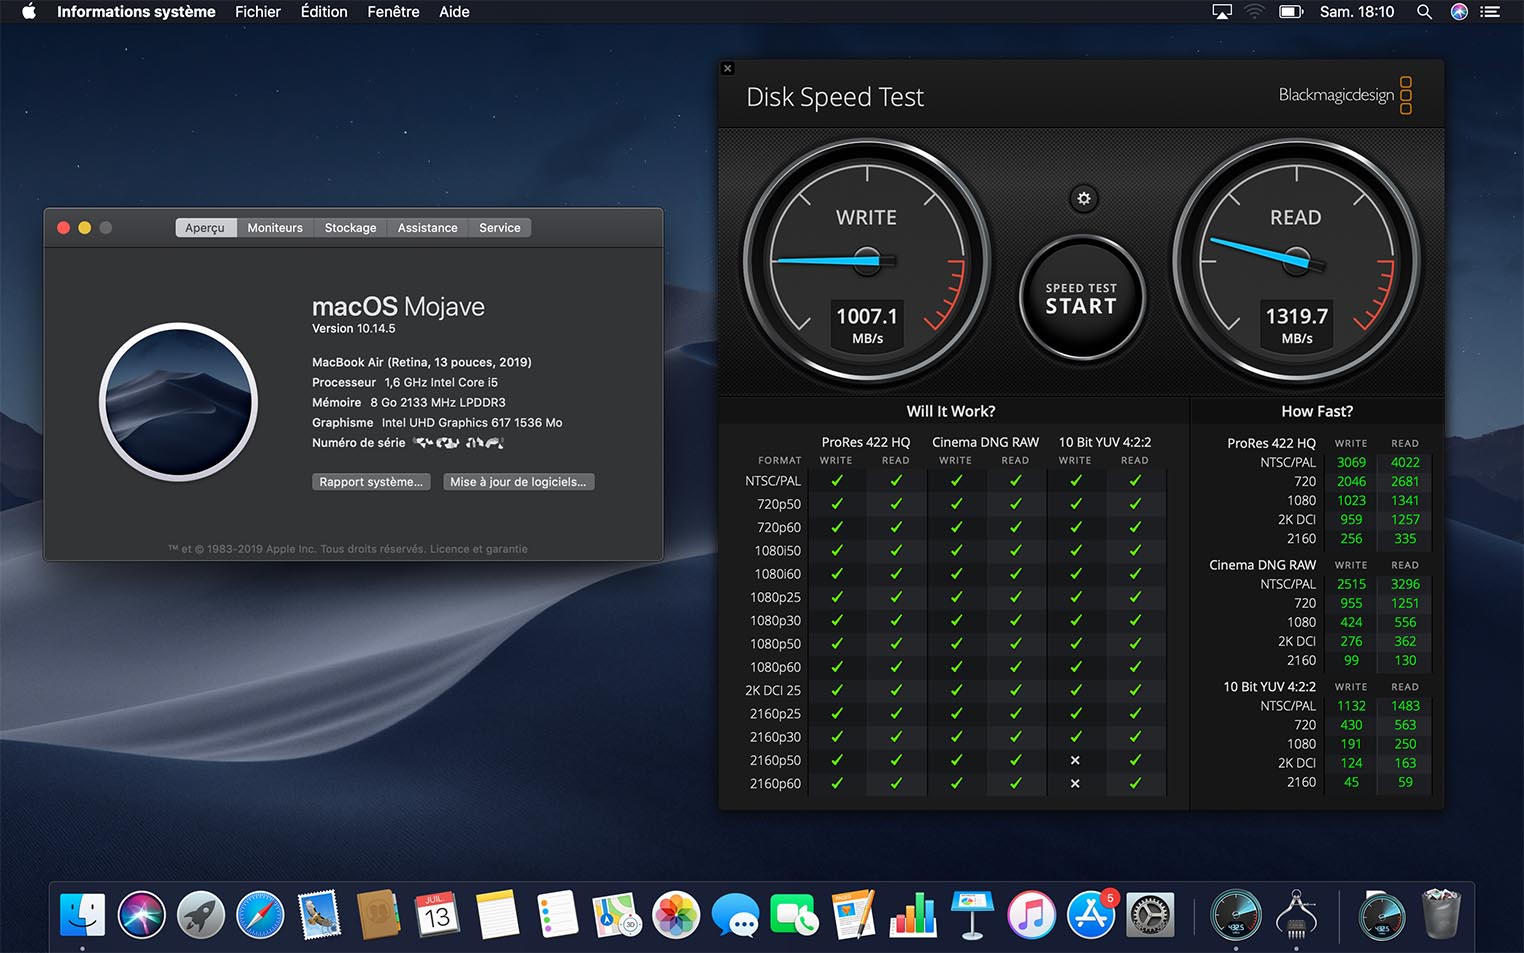 Input version of new MacBook Air brings slower SSD than previous one